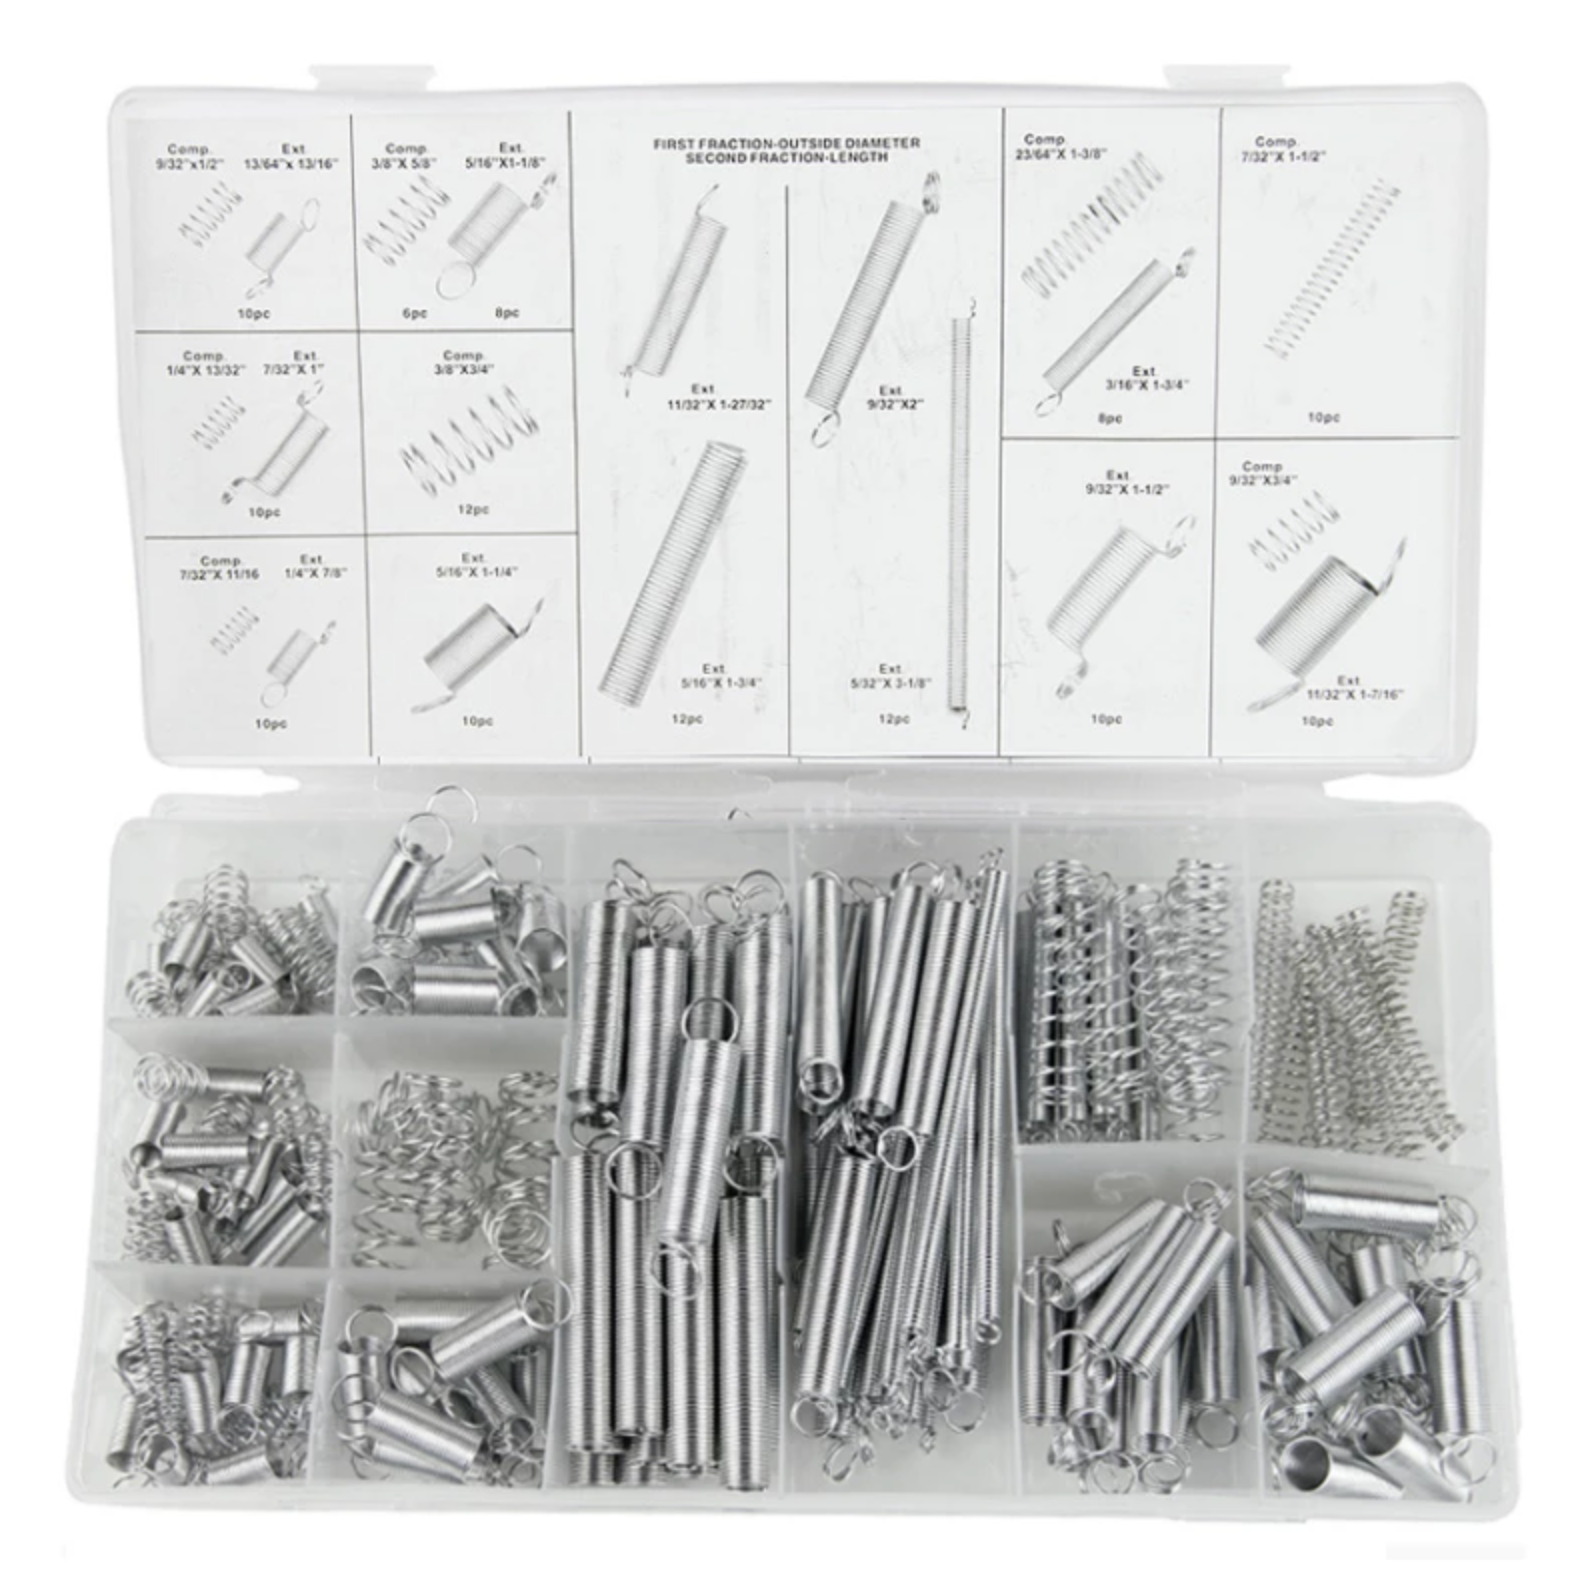 200pcs Steel Compression and Extensions Springs - Assorted Sizes and Strengths